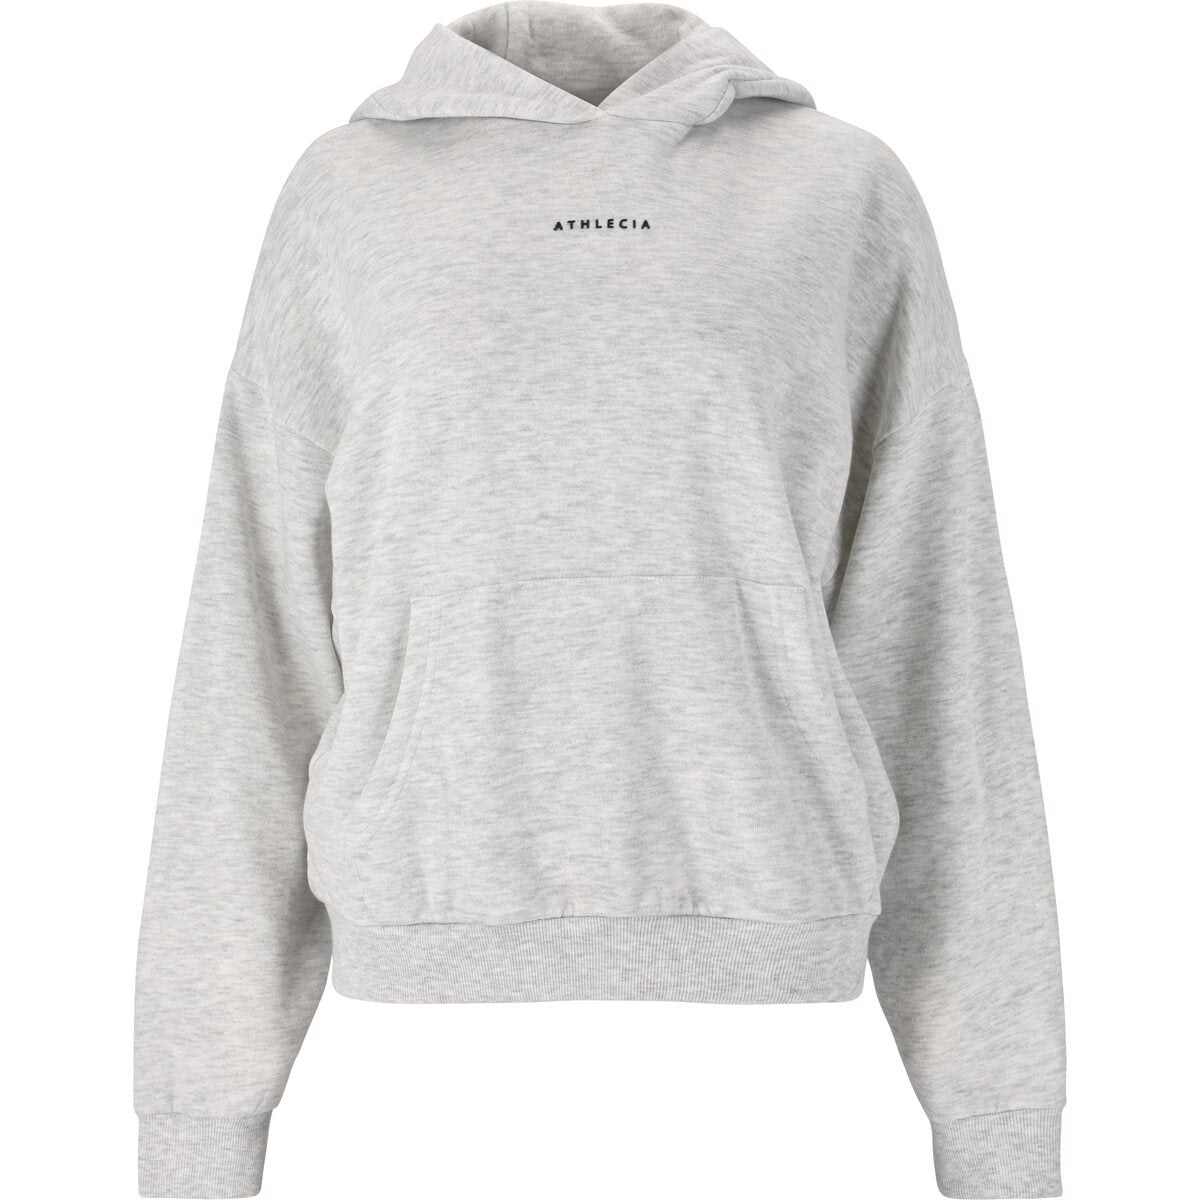 Athlecia Ruthie Womenswear Hoody 7 Shaws Department Stores